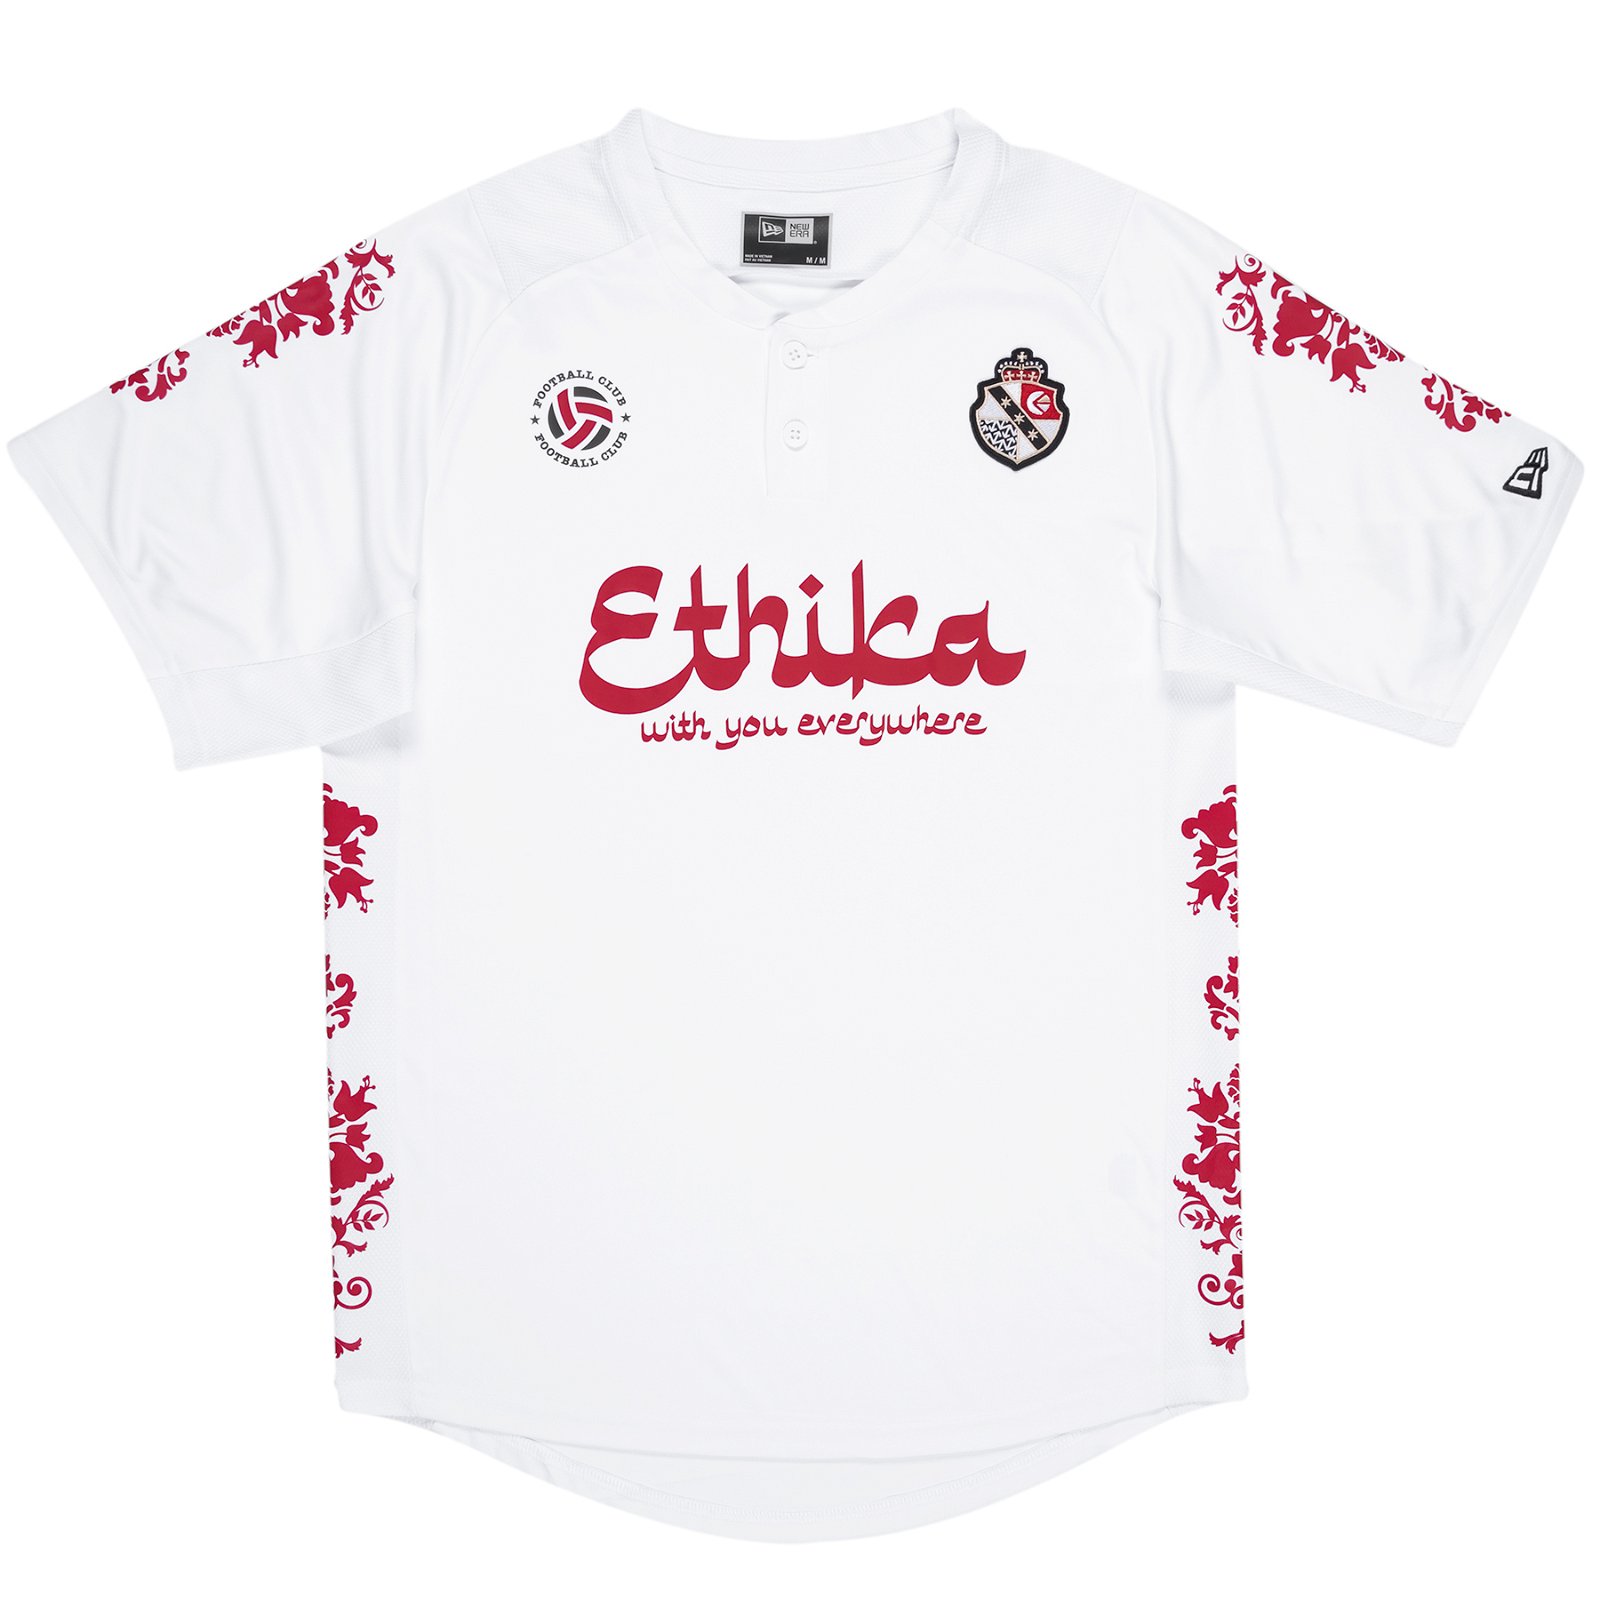 Ethika - World Cup Jersey